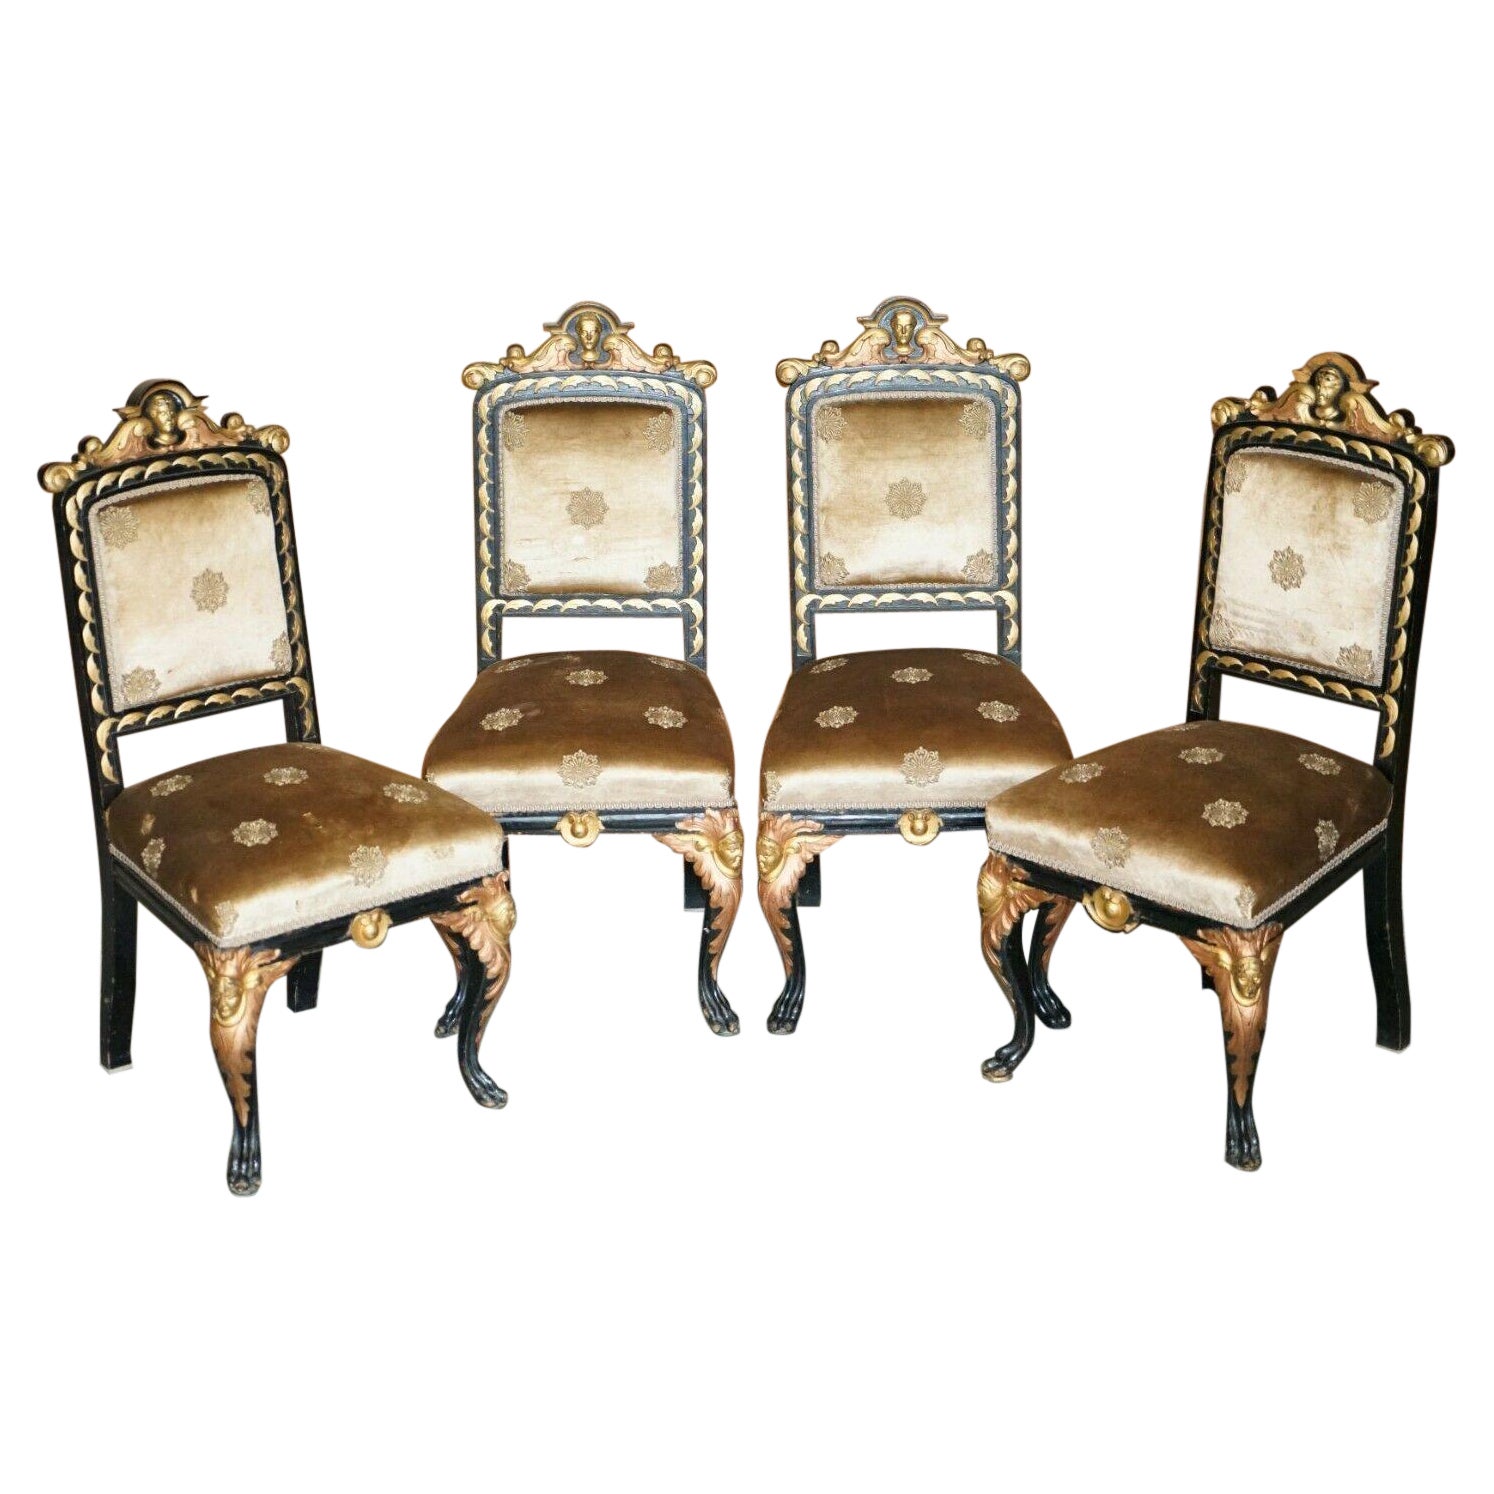 Four Restored Antique Victorian Heavily Carved Ebonised Gold Gilt Dining Chairs